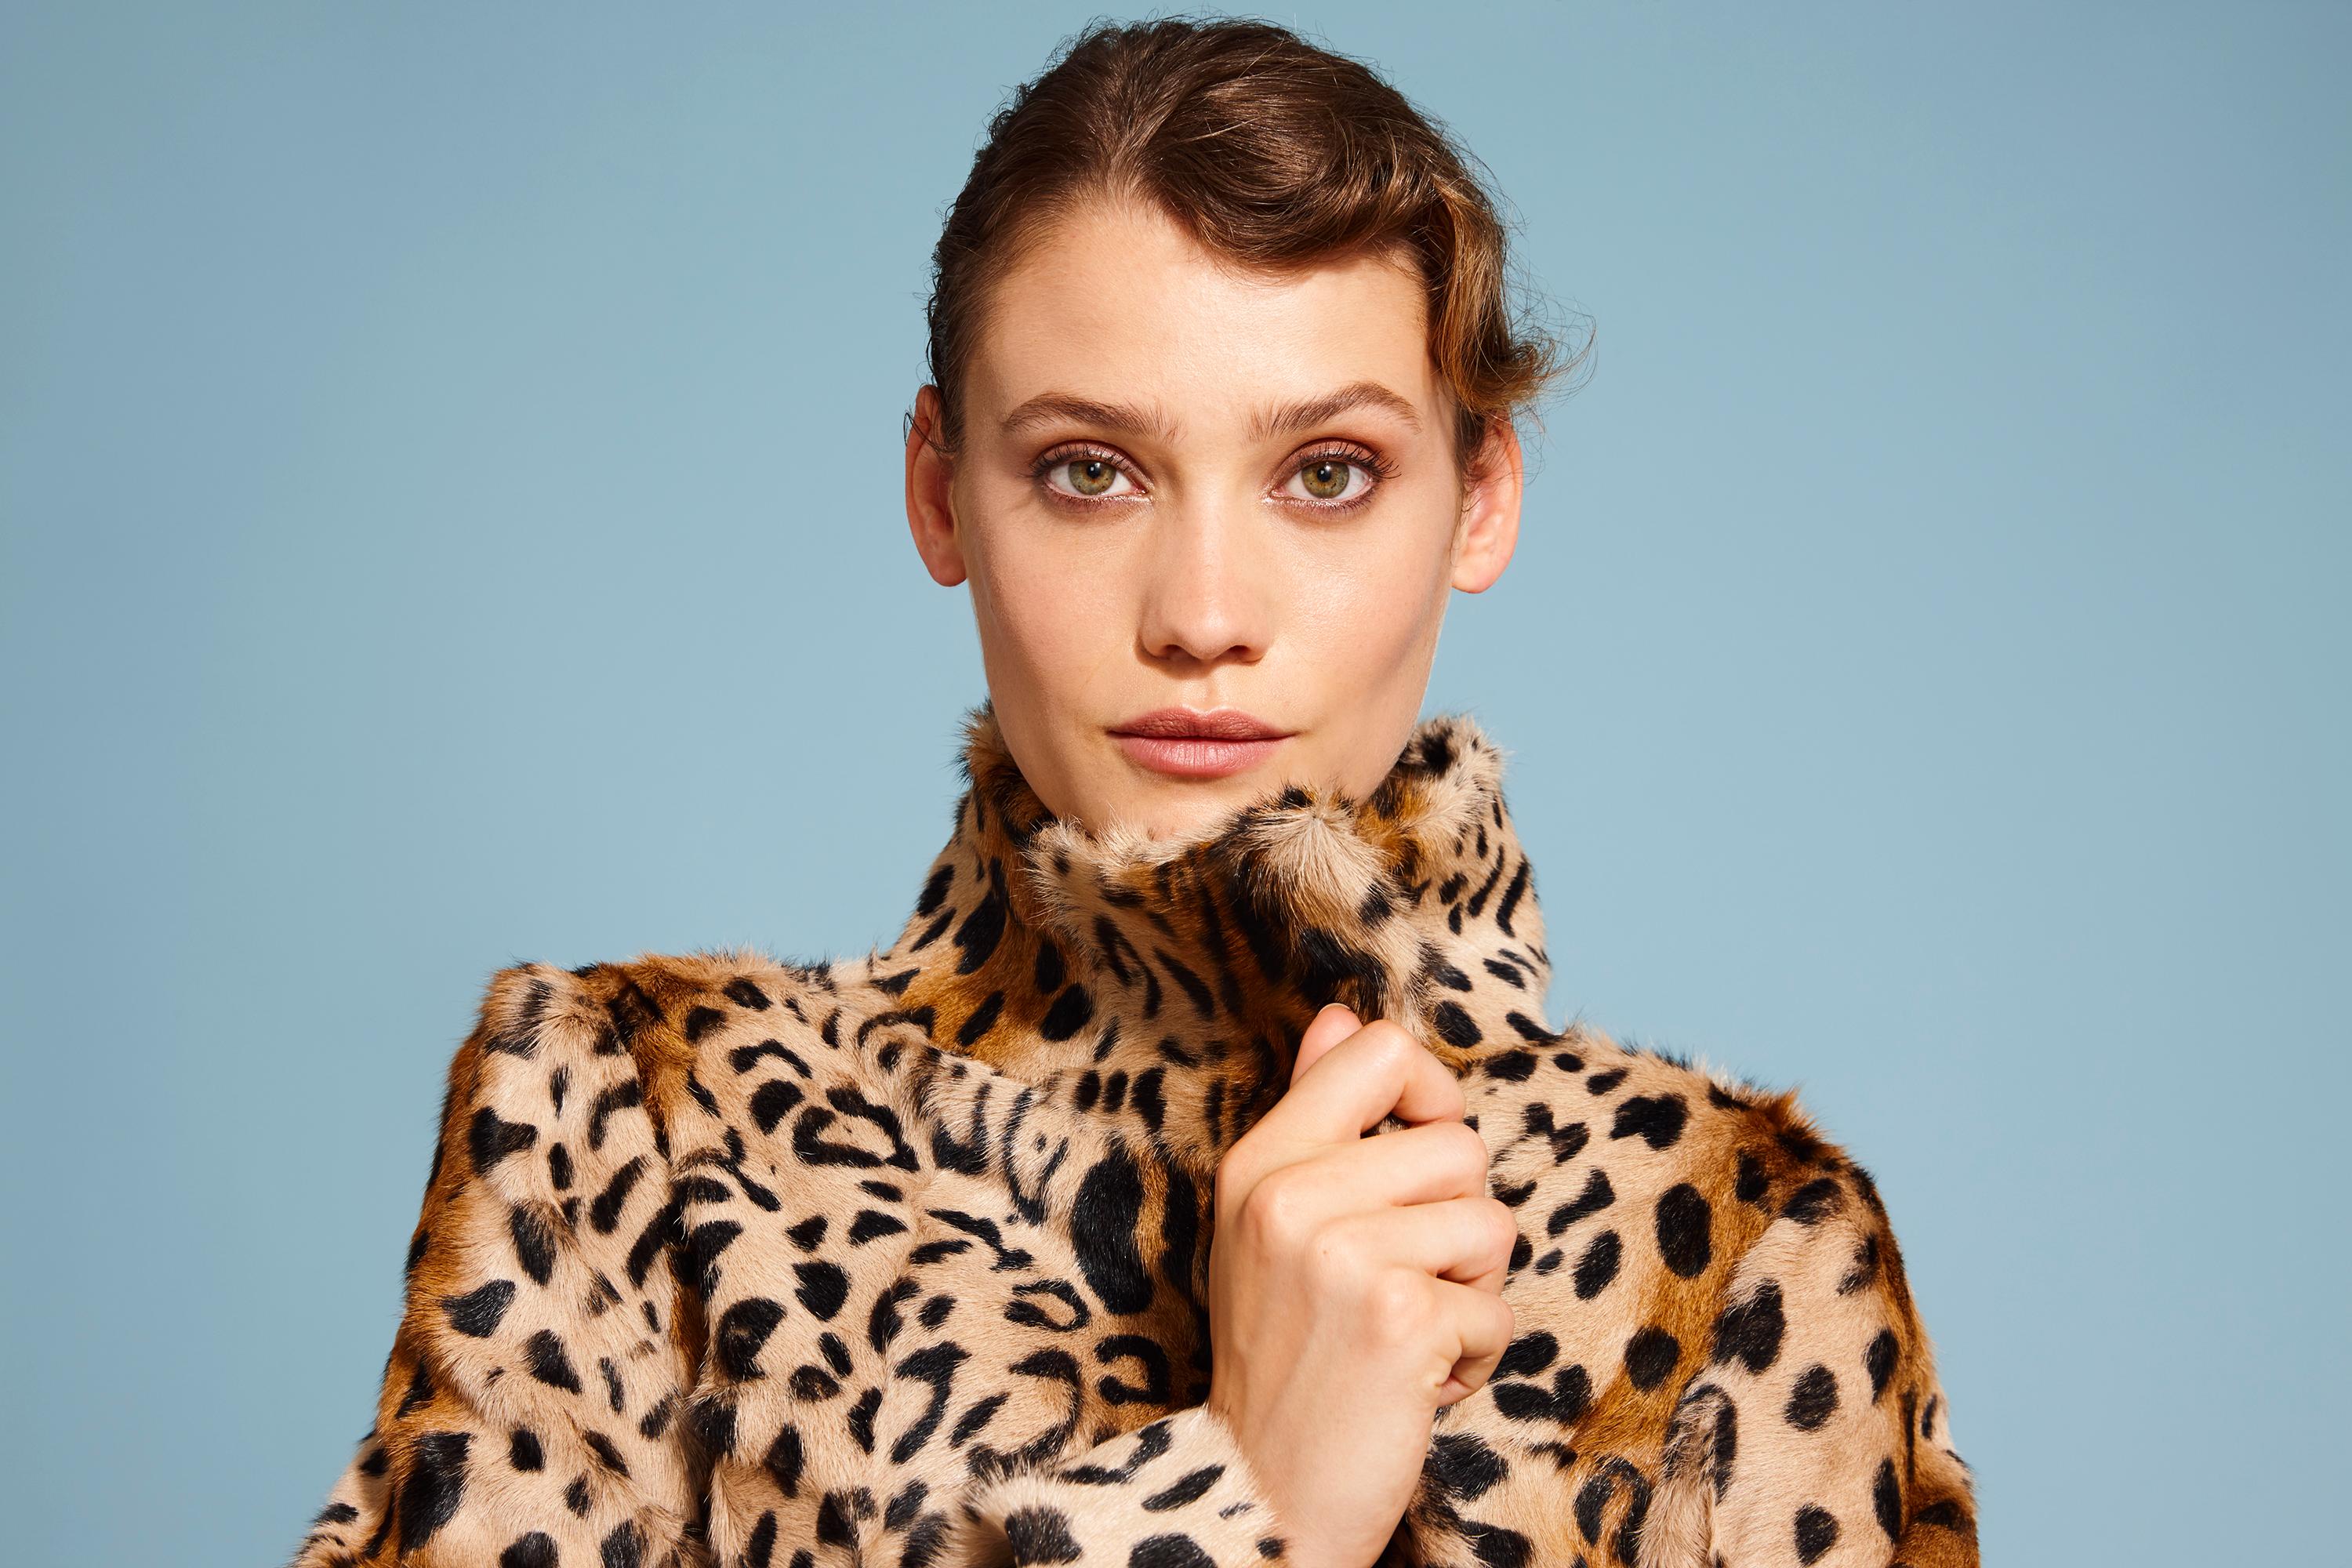 Verheyen London High Collar Leopard Print Coat Natural Goat Hair Fur Size uk 14

This Leopard print coat is Verheyen London’s classic staple for effortless style and glamour.   Verheyen London is a luxury brand who specialises in outerwear that will